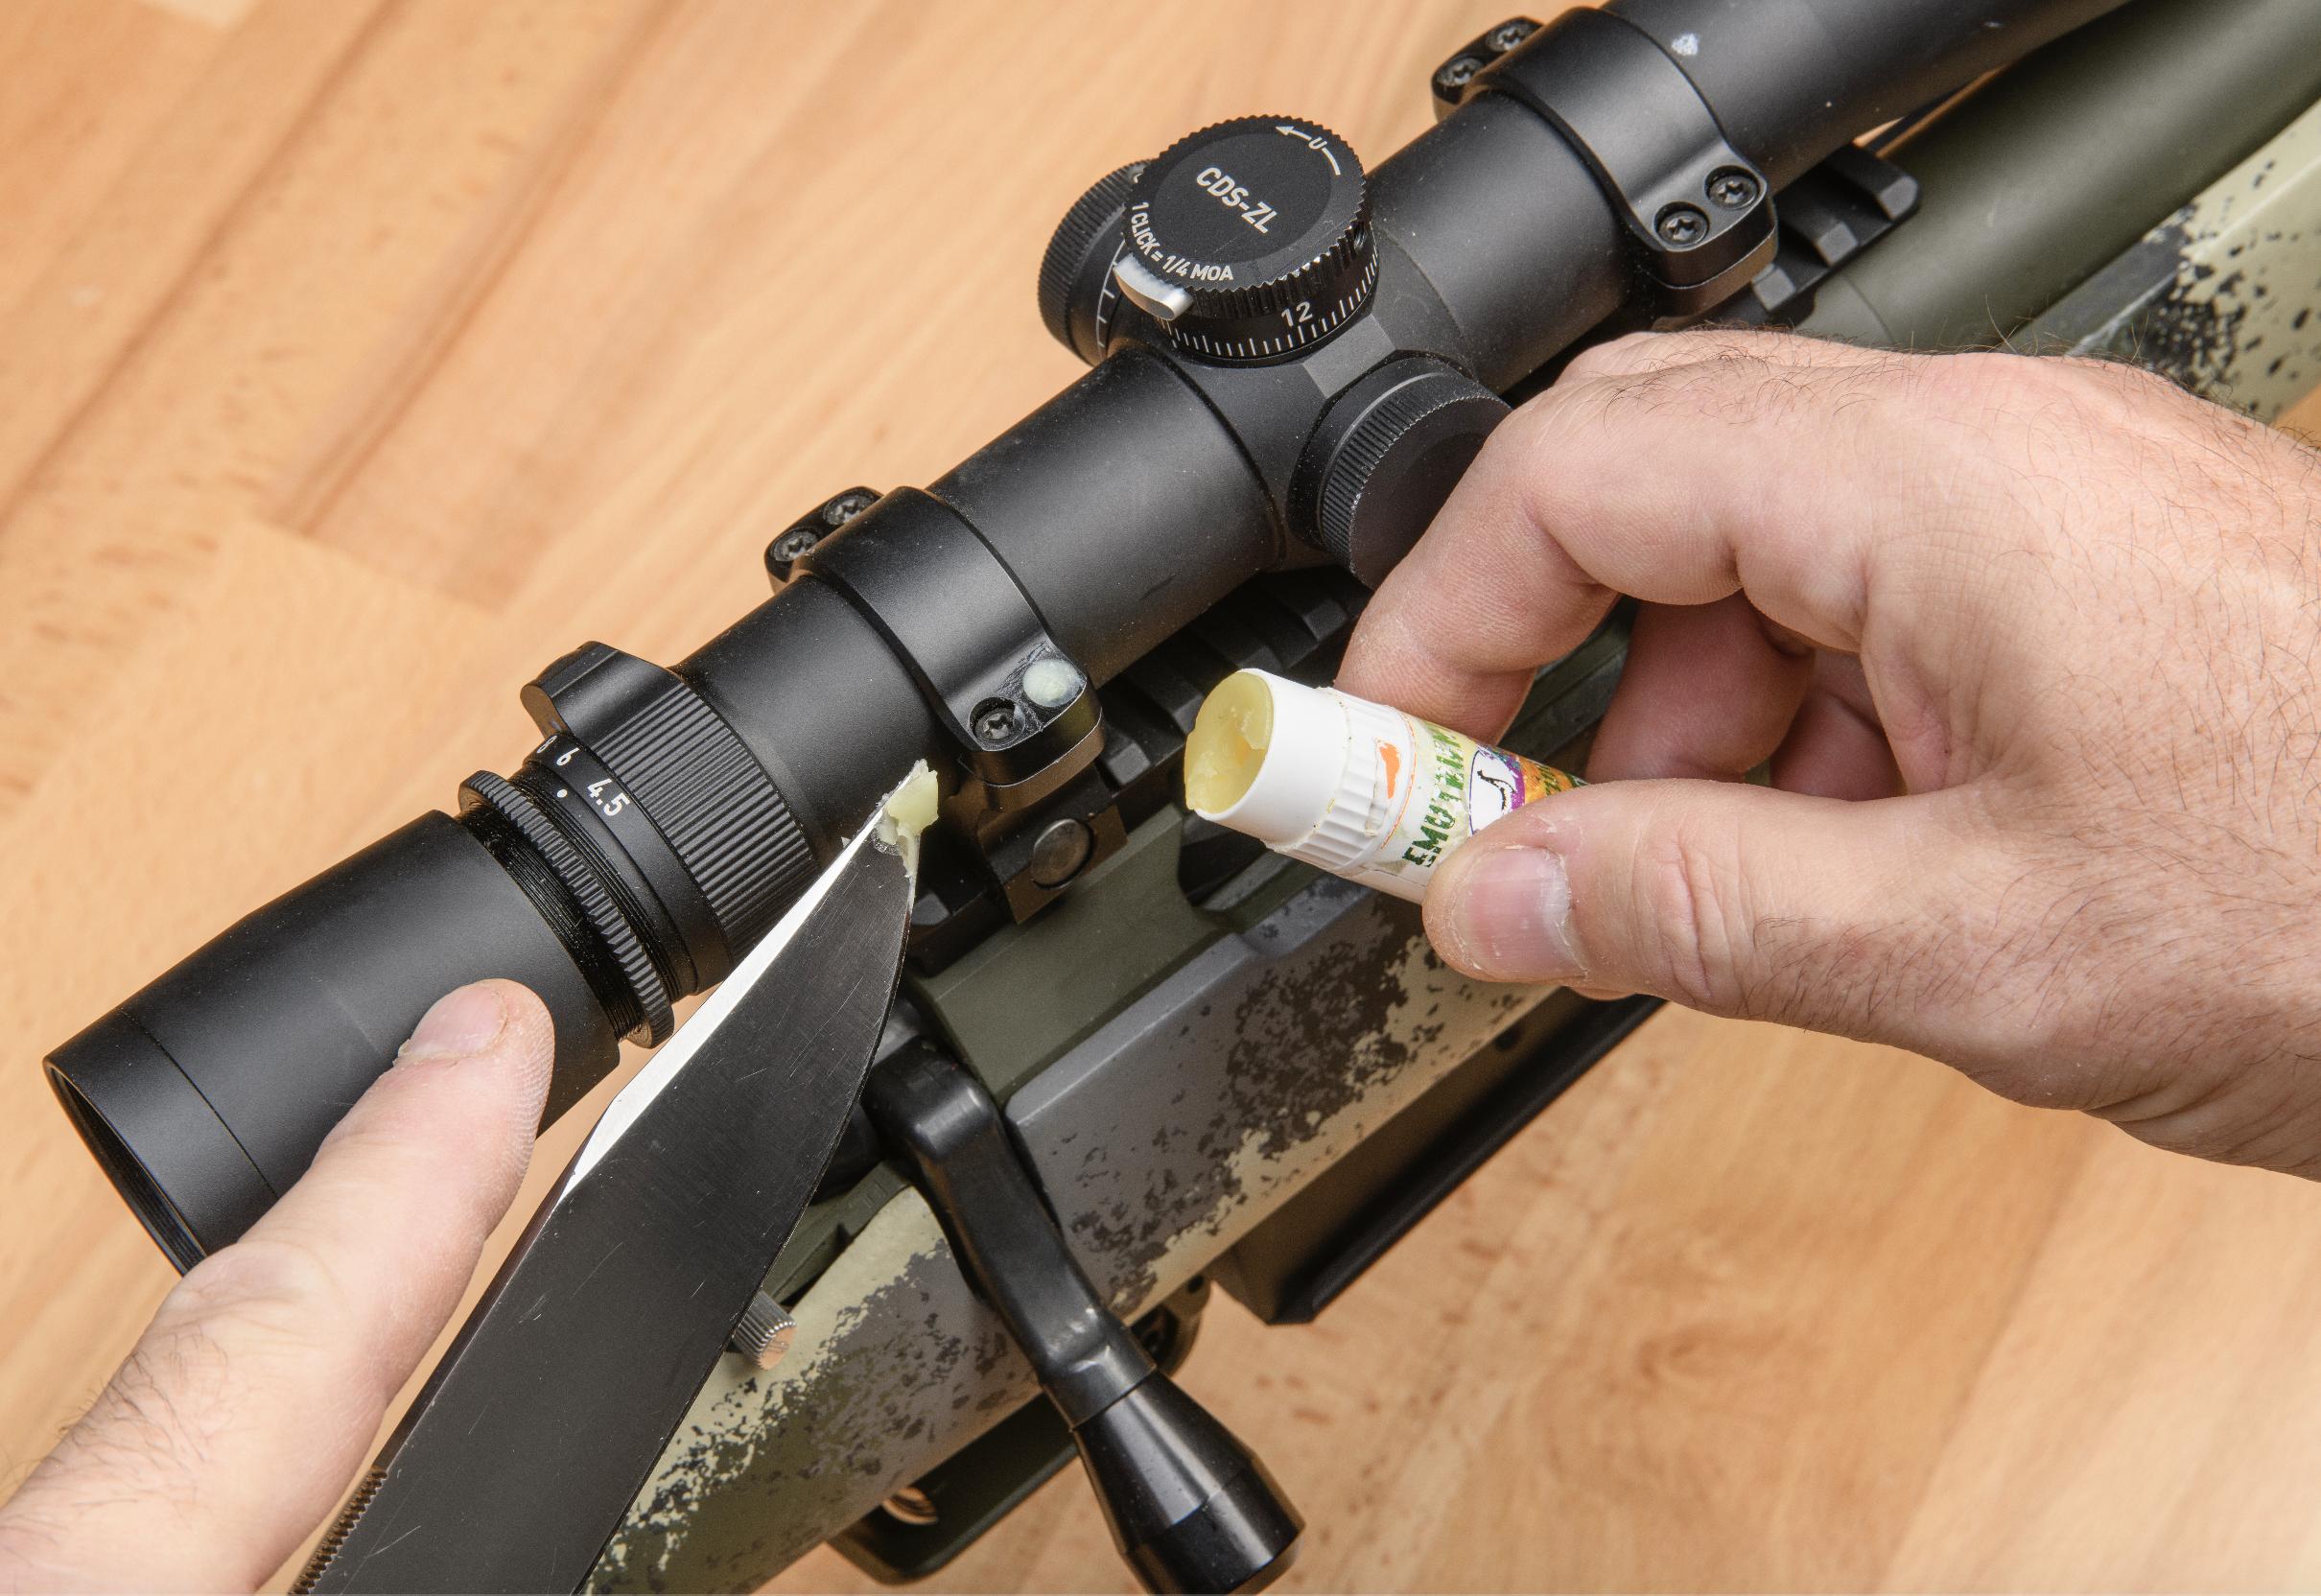 A pair of hands holds a chapstick tube and a knife-tip coated in chapstick while applying it to one of the screw heads on the riflescope bases.